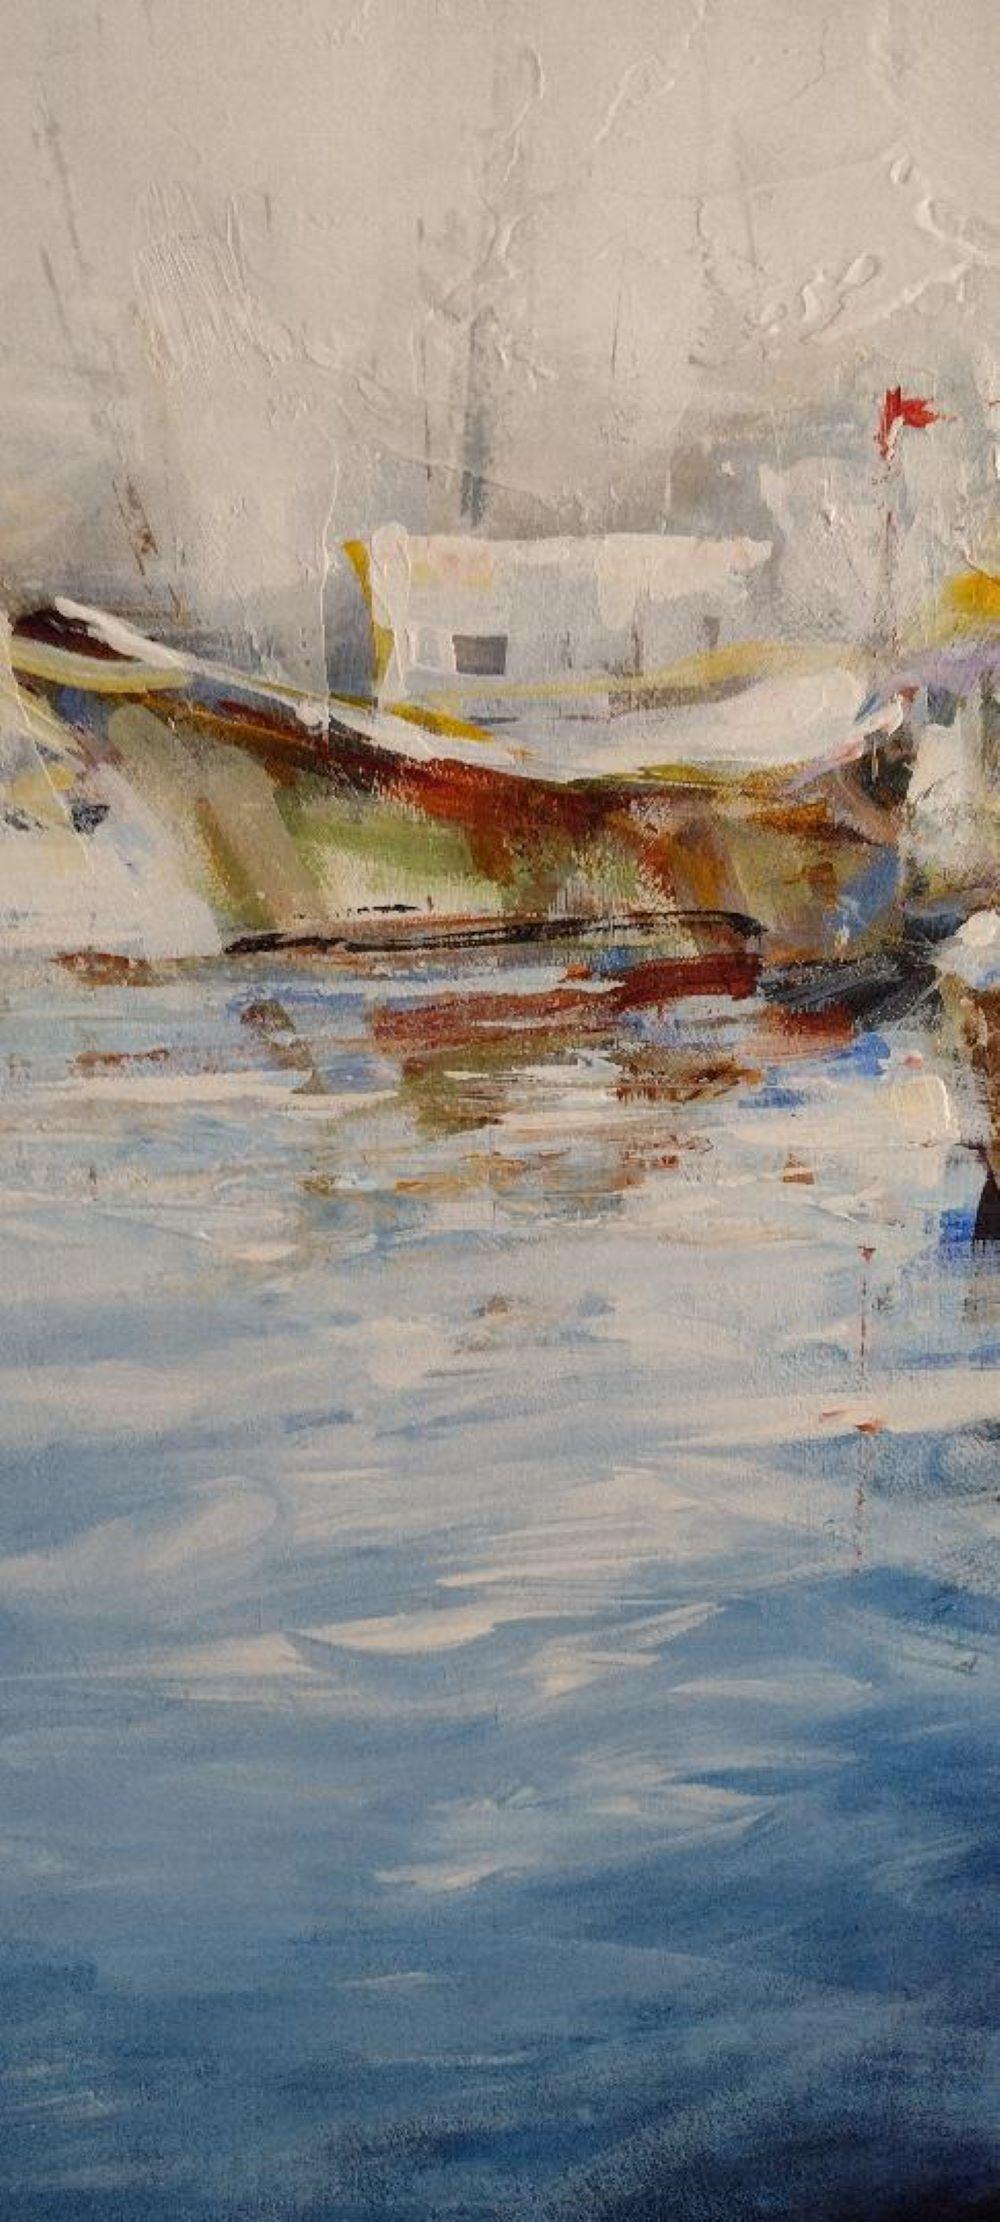 Cozy Days - Contemporary expressionist boats in harbor-glowing sunlight on water - Gray Landscape Painting by Torabi